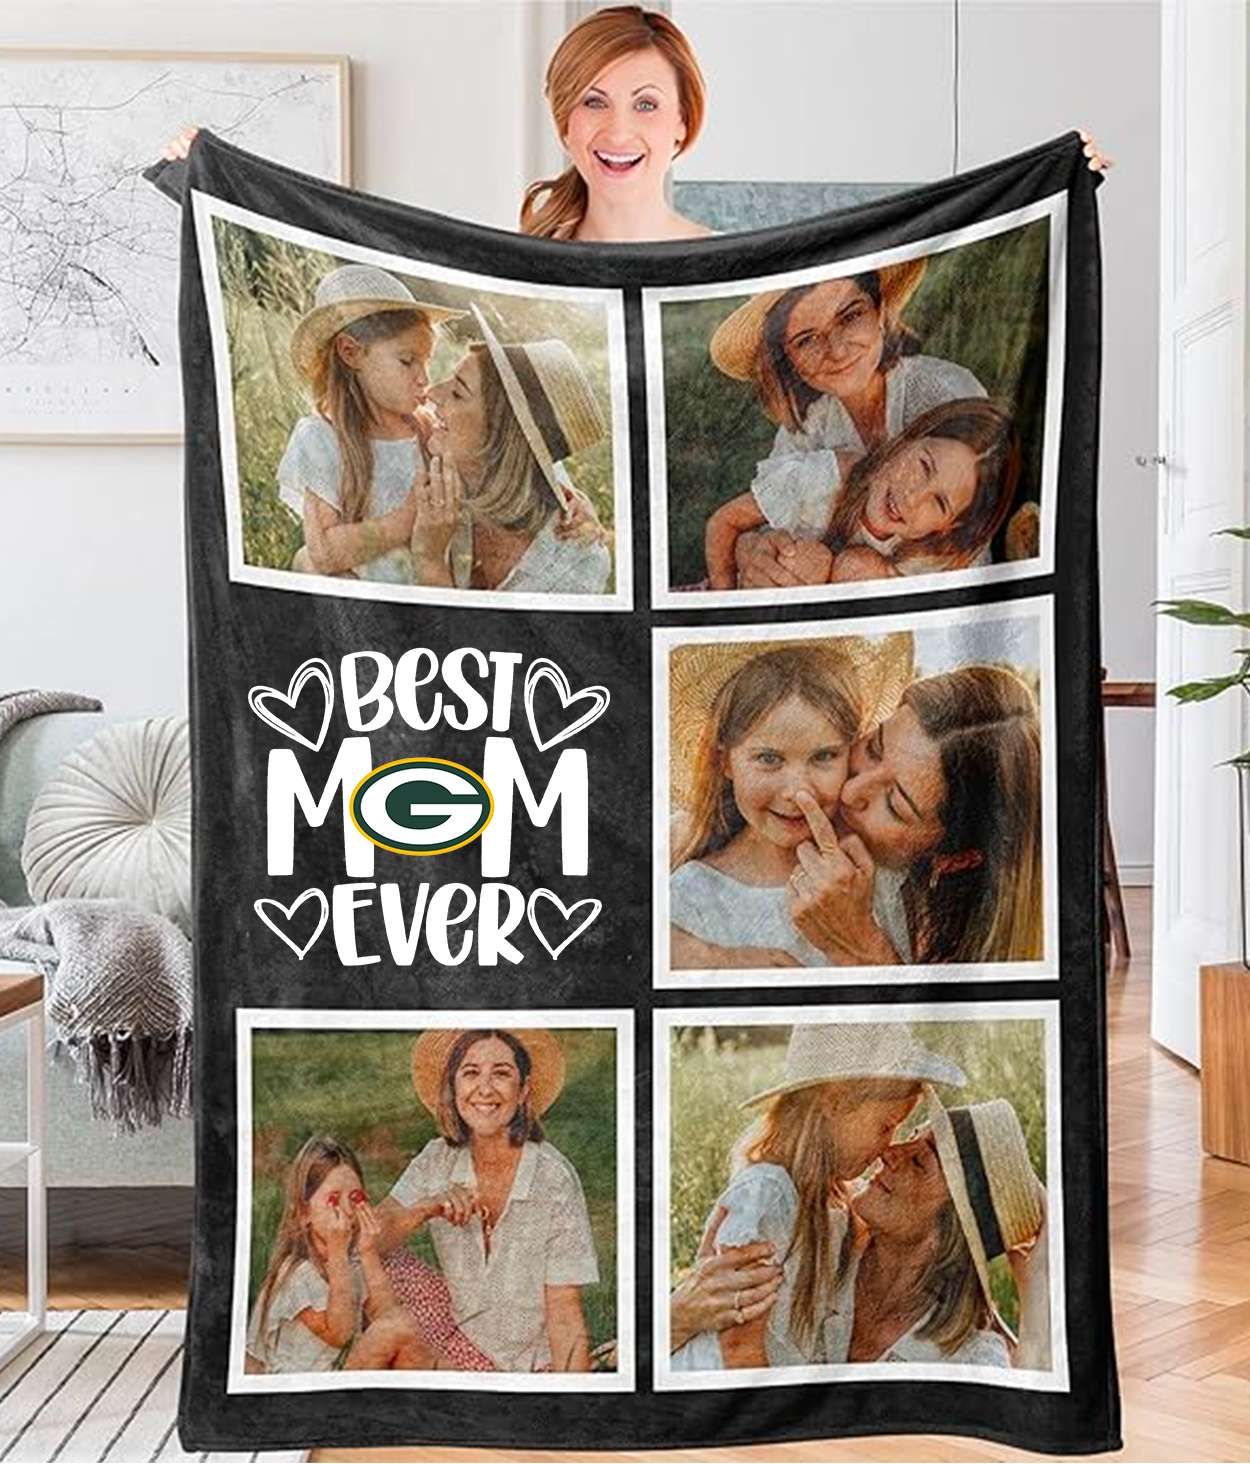 Best Mom Ever - Custom NFL Green Bay Packers Blankets with Pictures for Mother's Day Gift